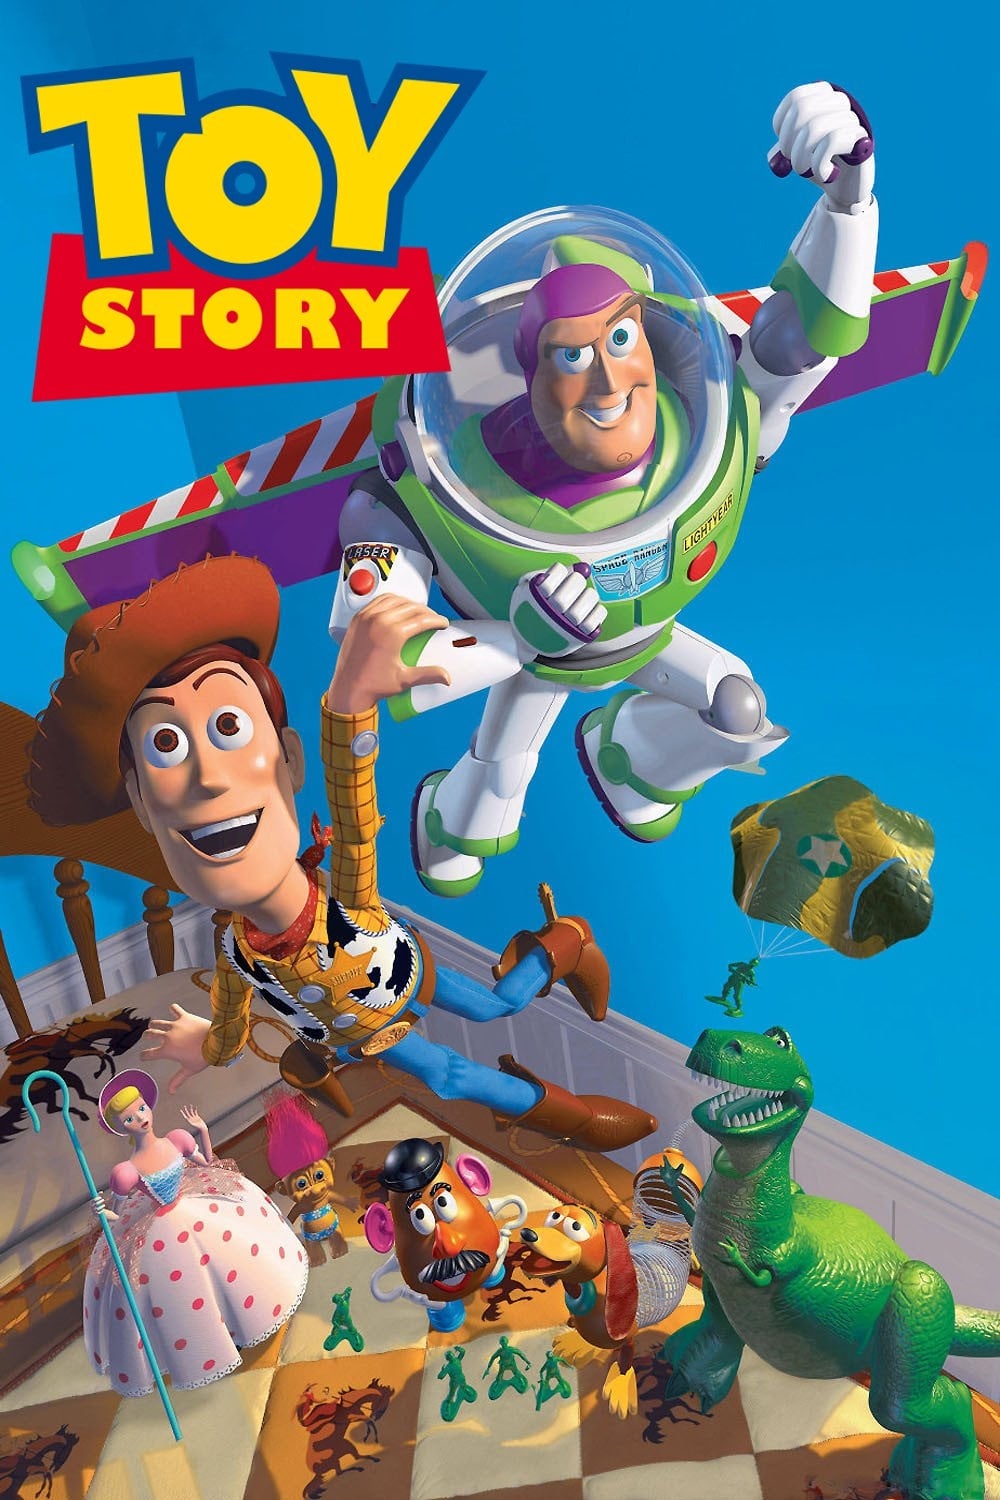 Toy Story 1 (1995)